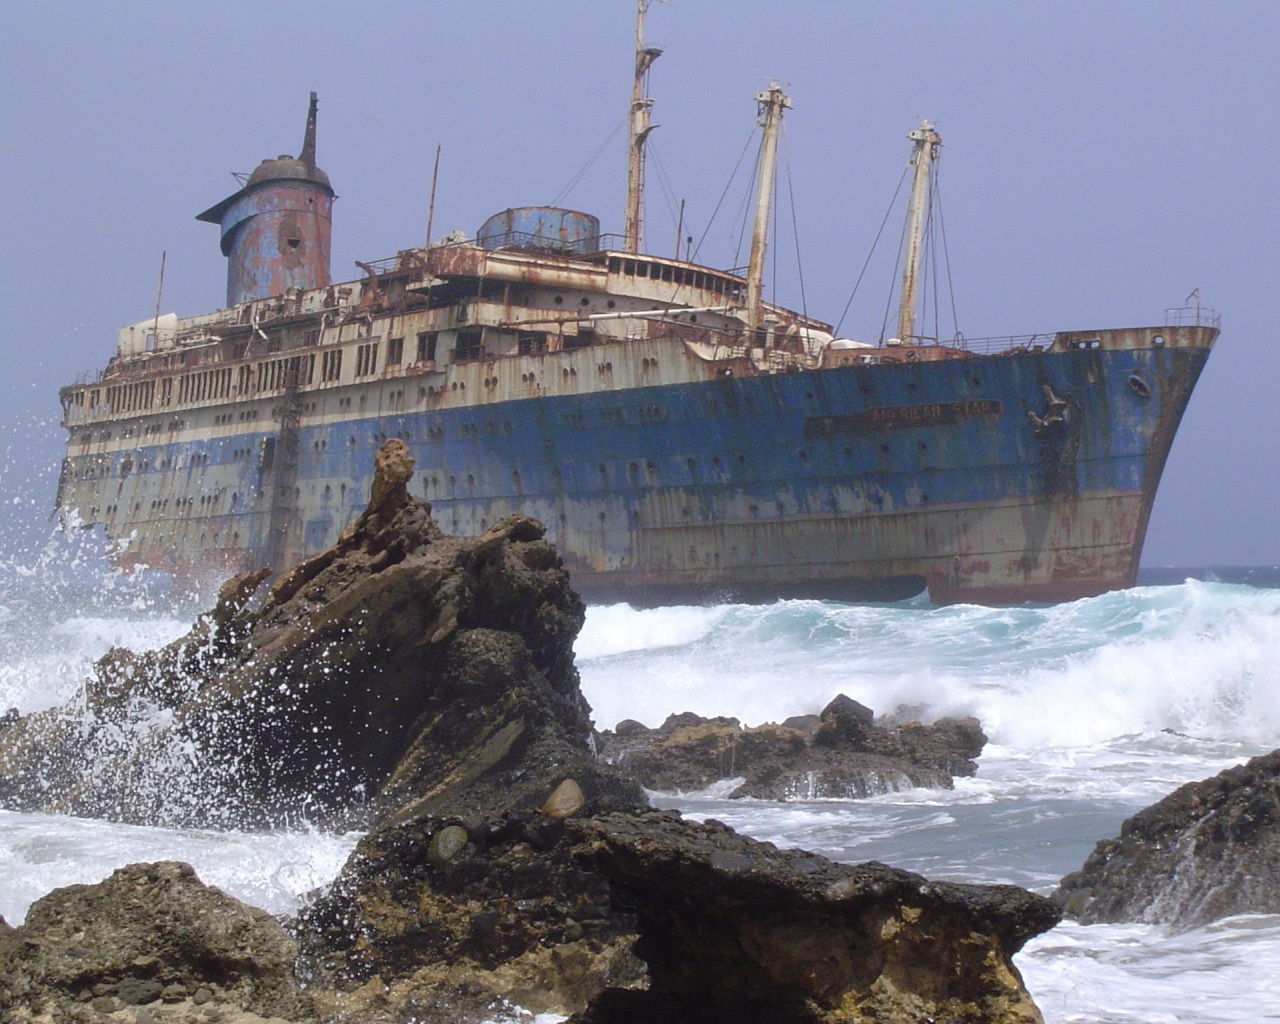 Abandoned ship is on the rocks